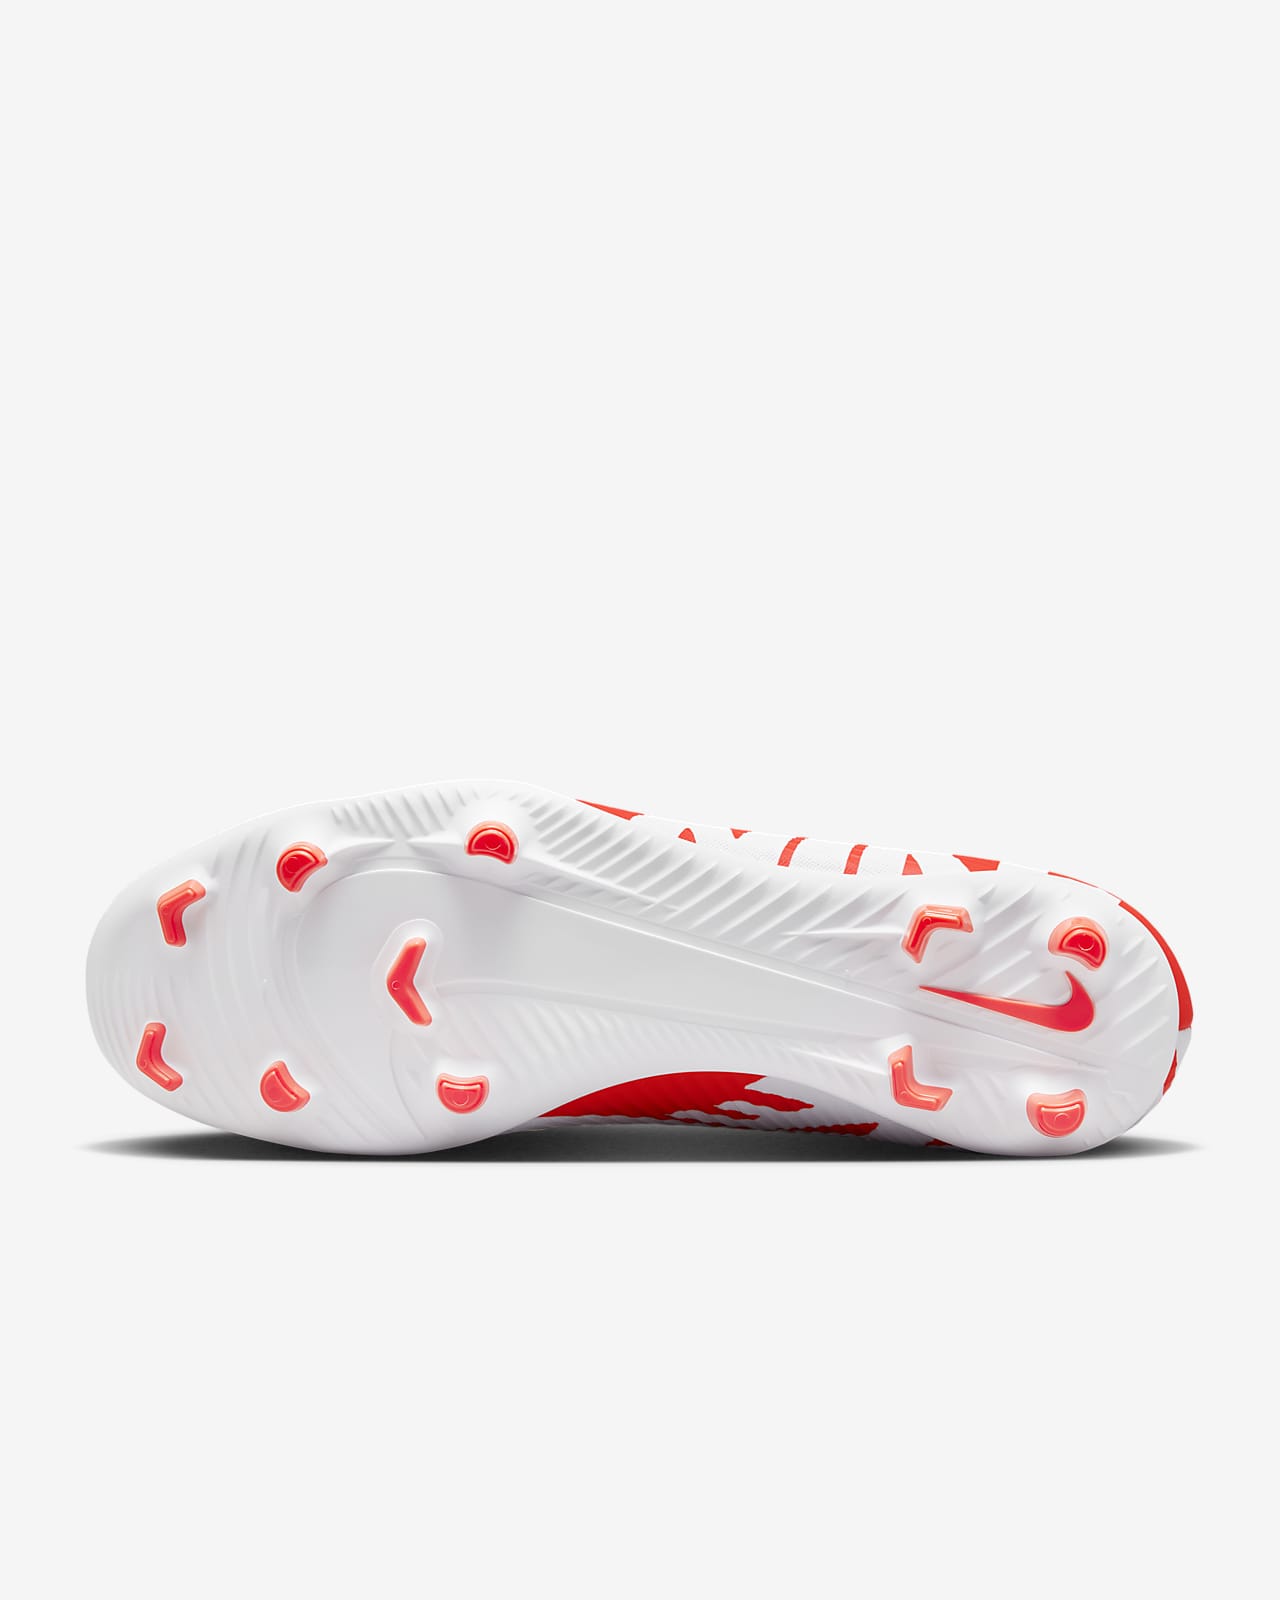 Nike Mercurial Superfly 9 Club FG Soccer Cleats - Red & White - 1 Each